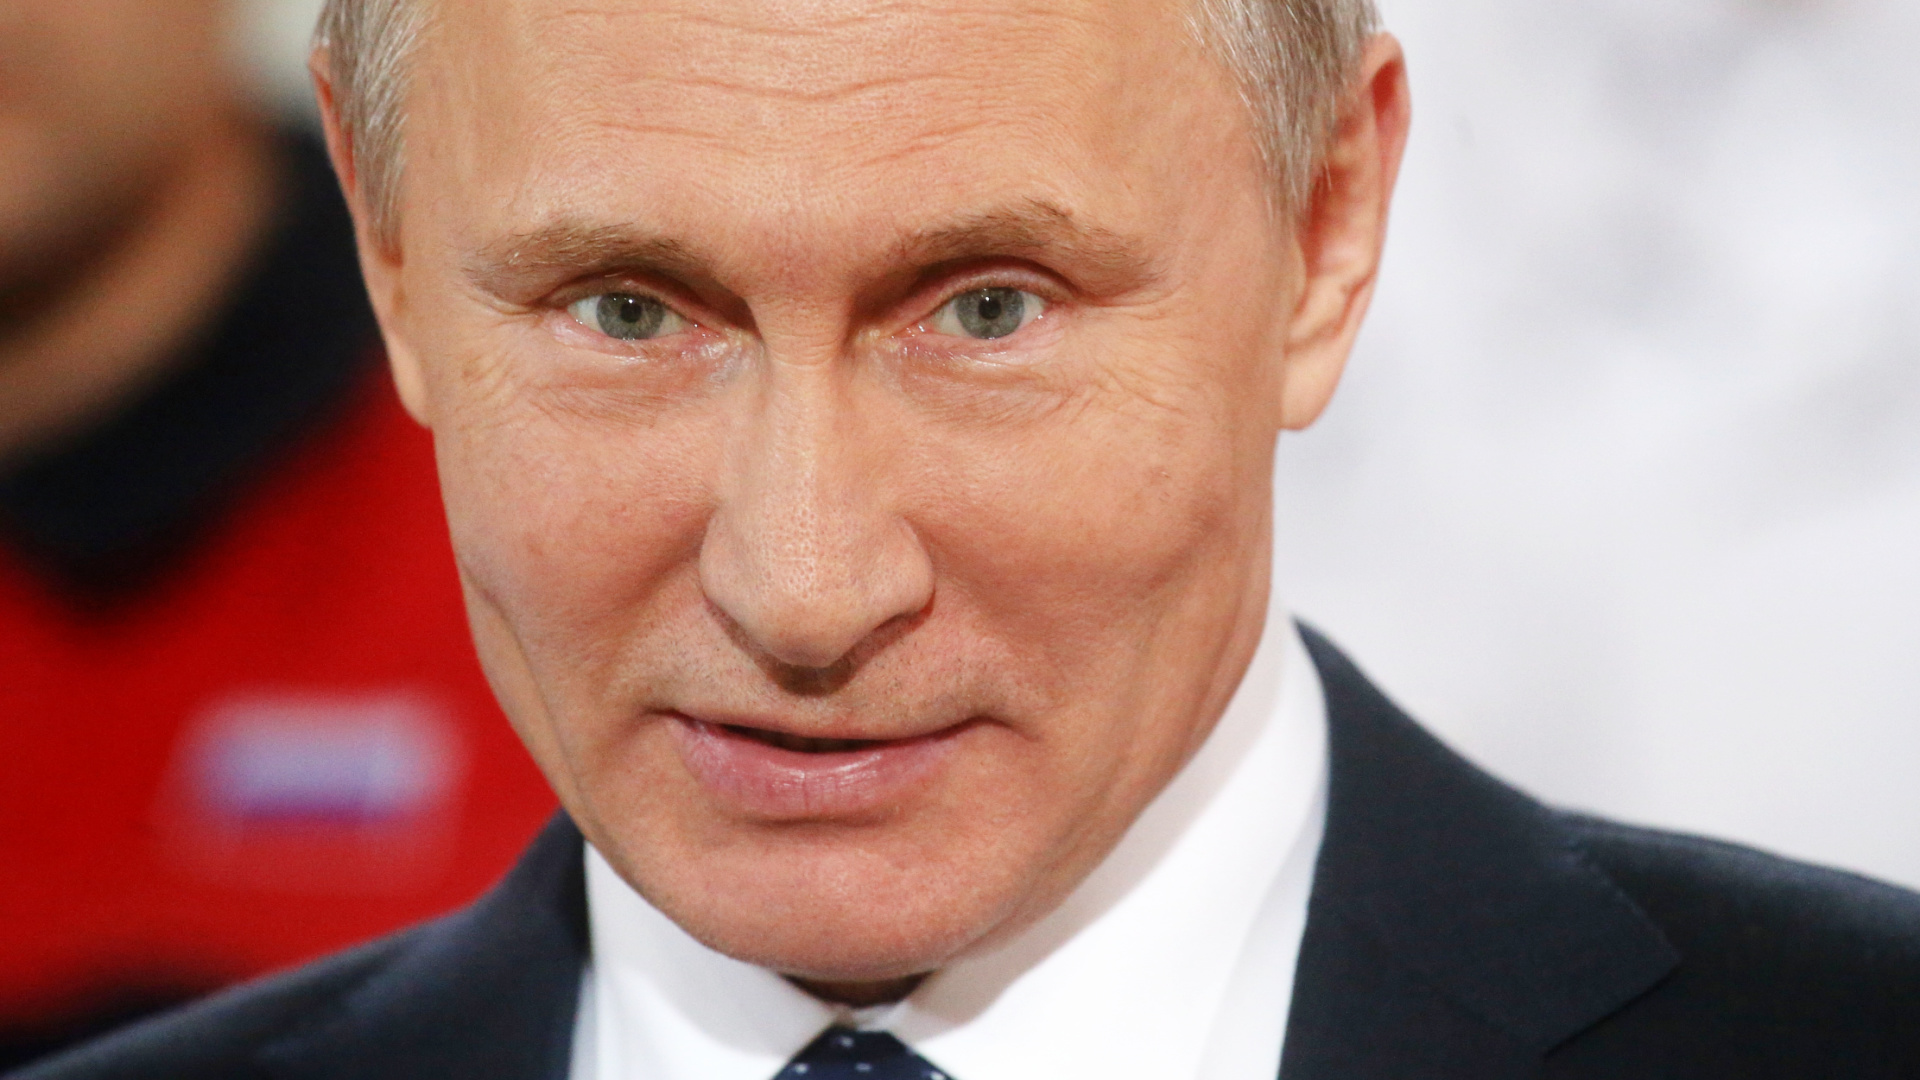 Who does Putin want to win in 2024 US elections?